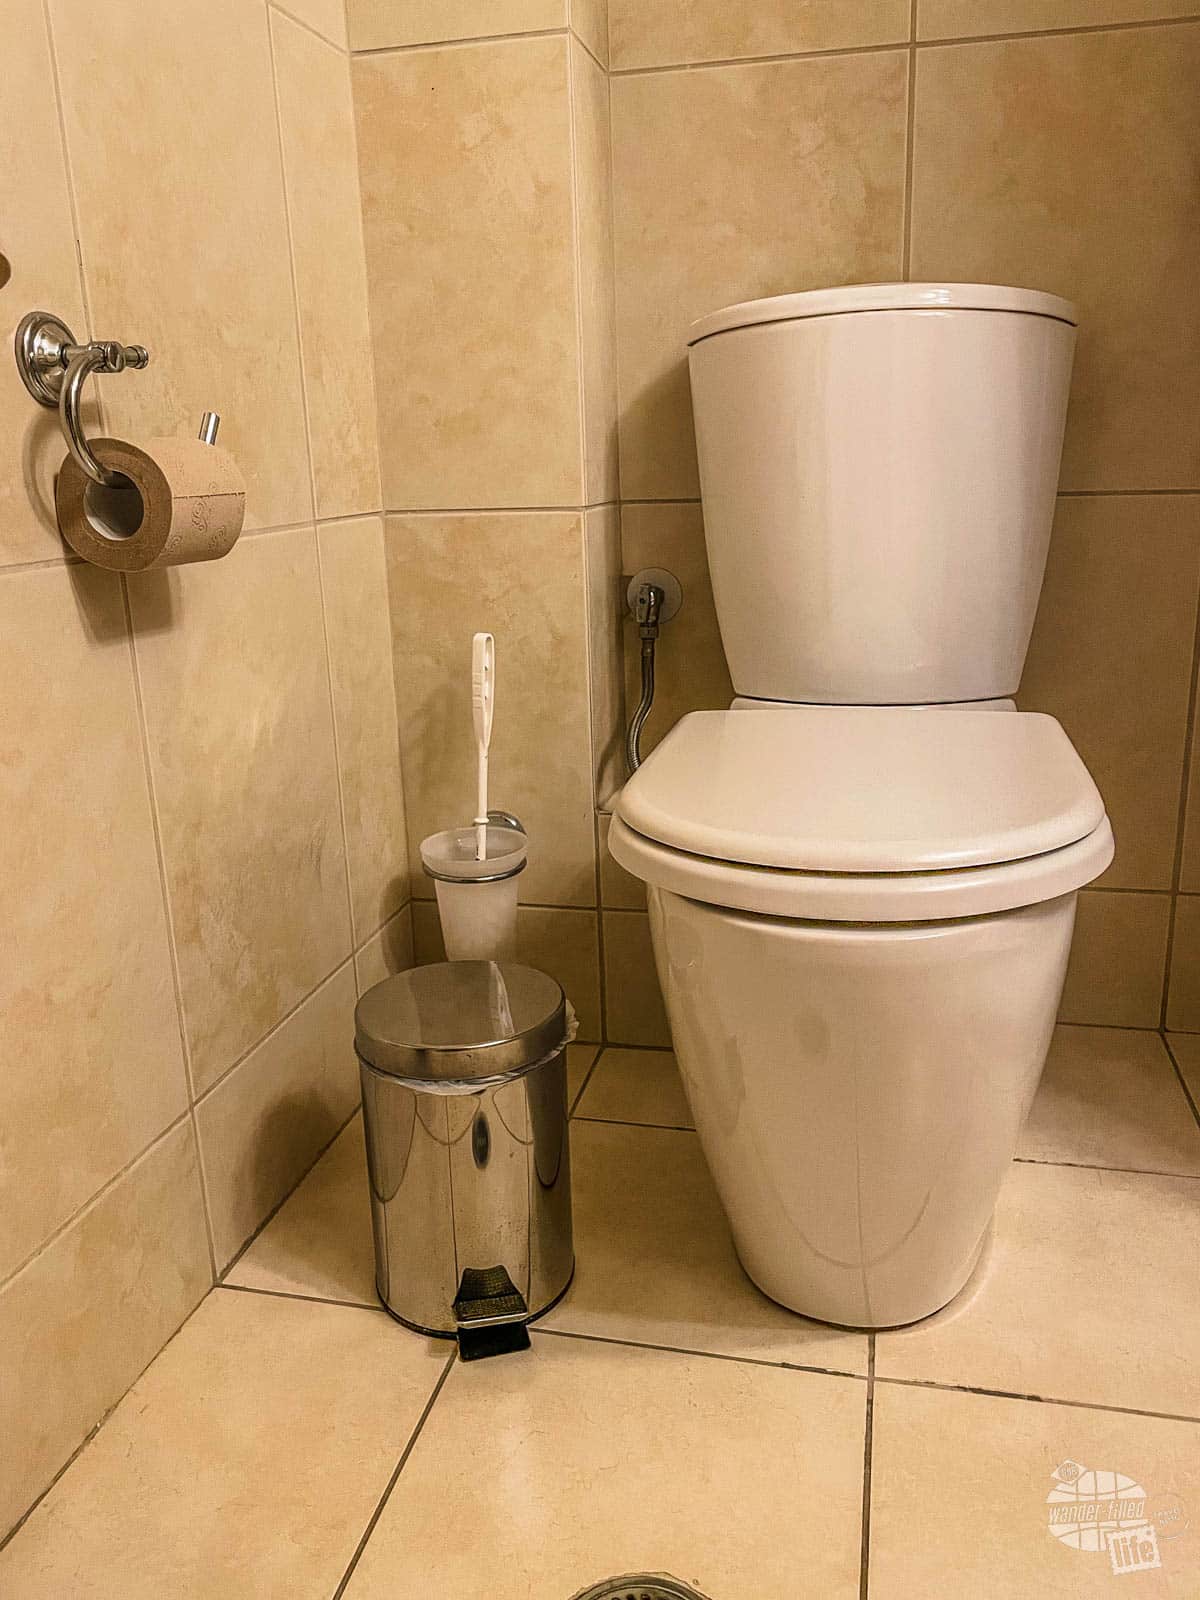 A toilet in Greece with a trash can beside it.